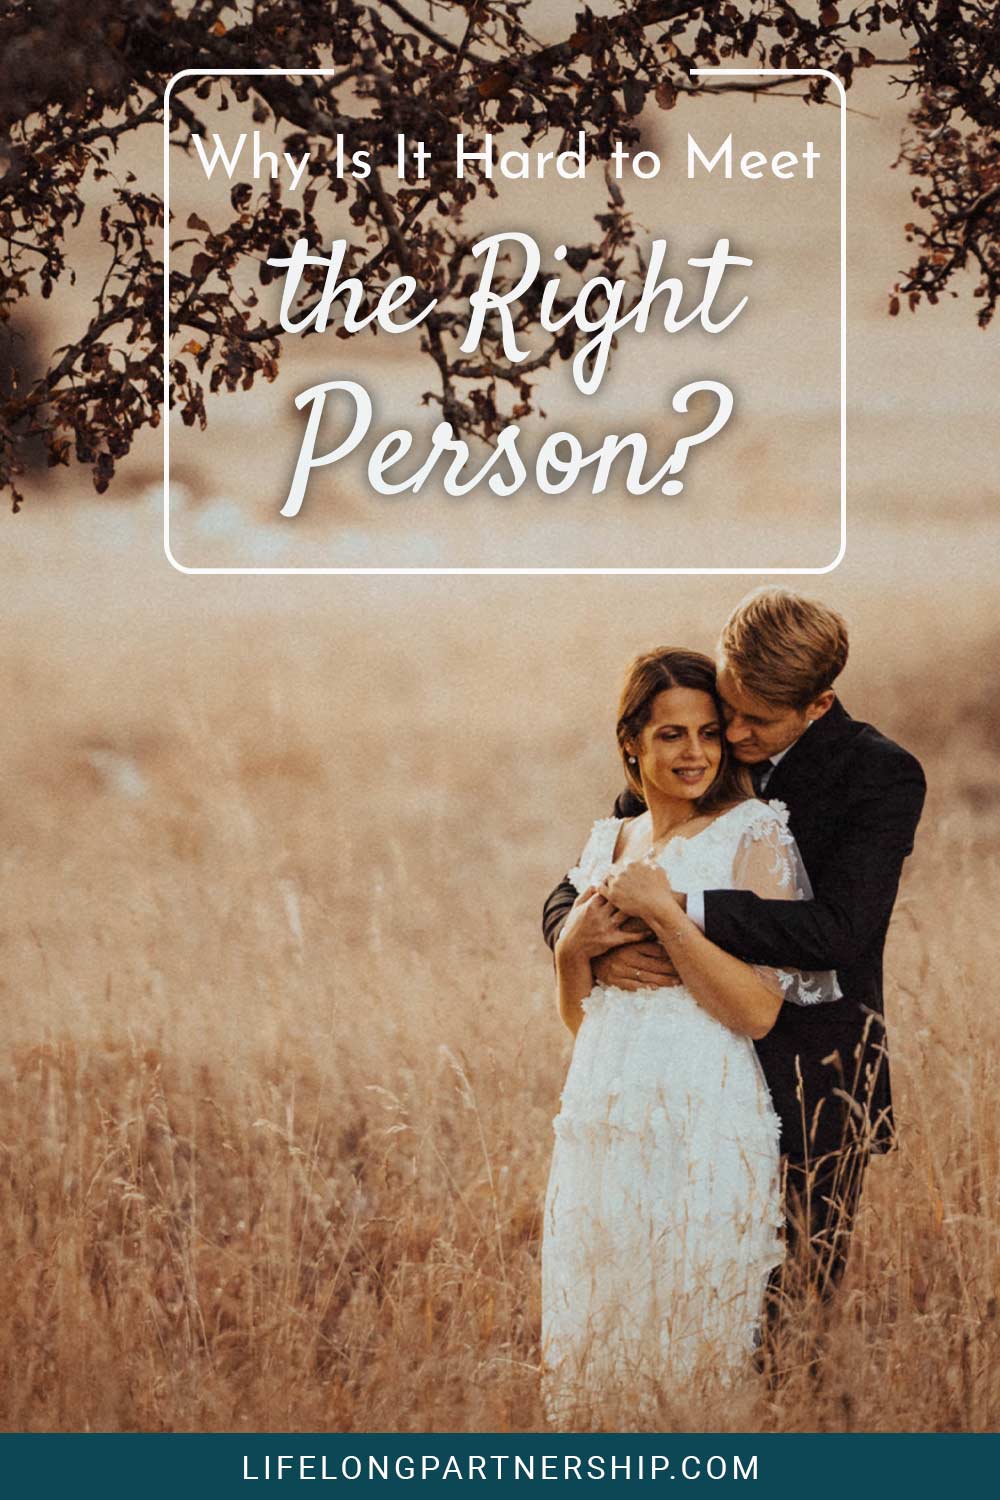 Man holding a woman from behind standing in a field - Why Is It Hard to Meet the Right Person?